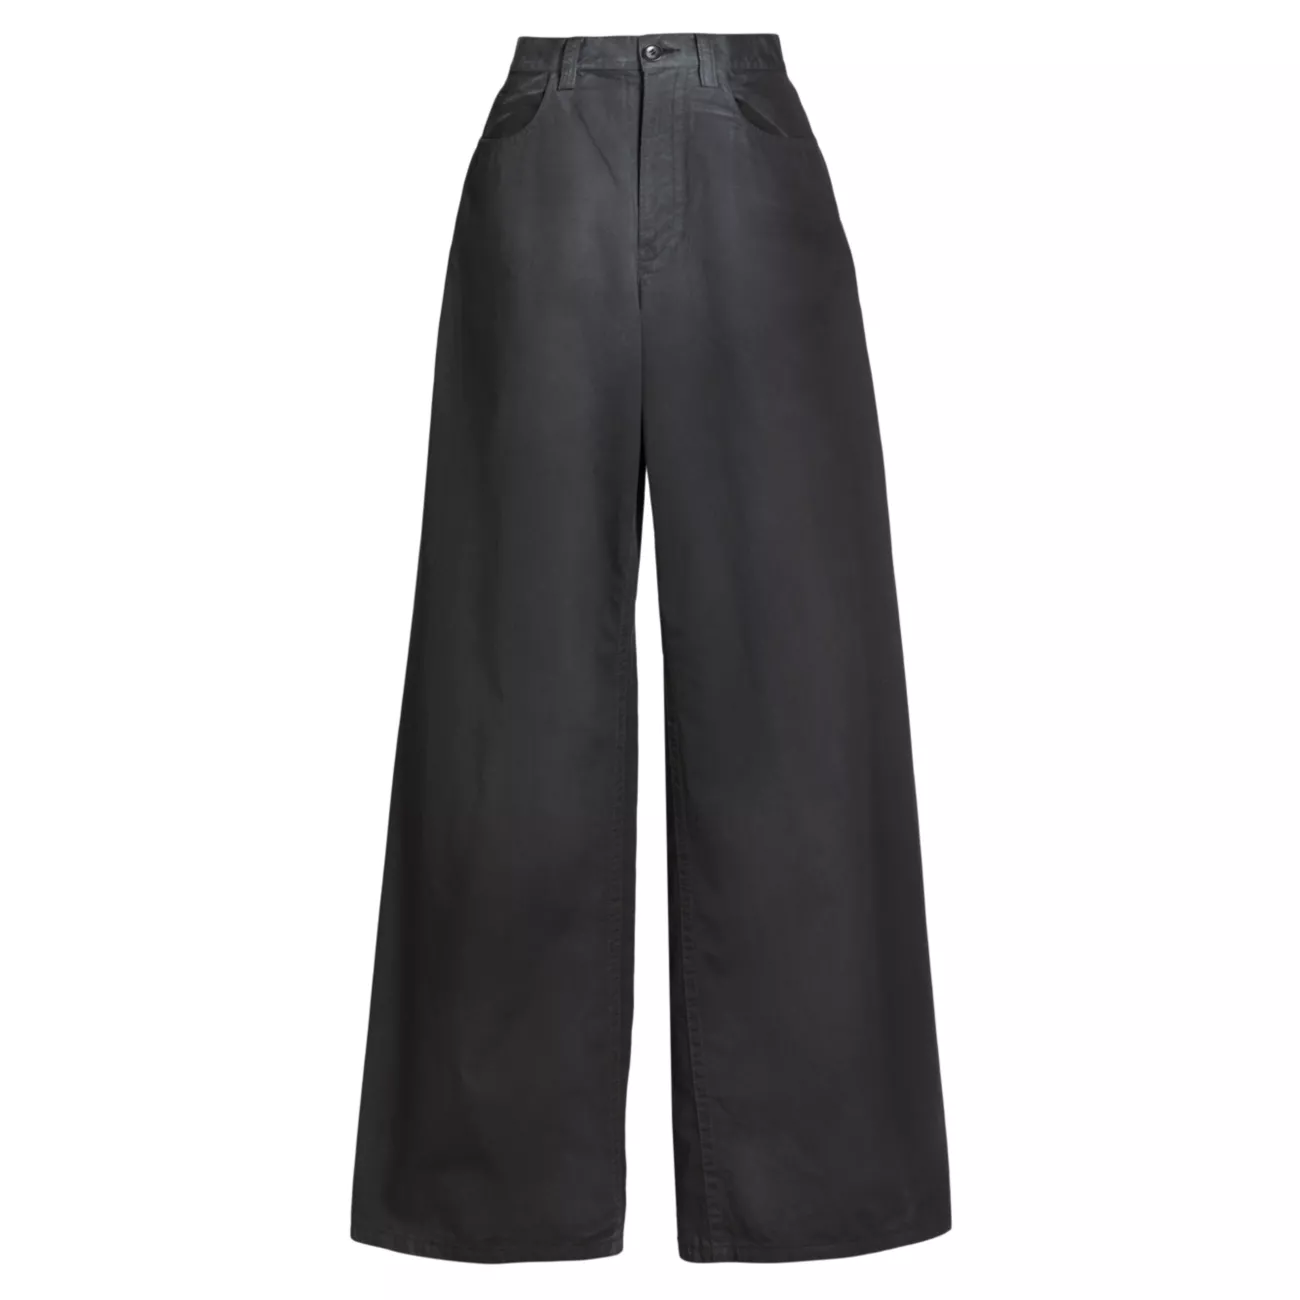 Mid-Rise Darted Wide-Leg Jeans Alexander Wang